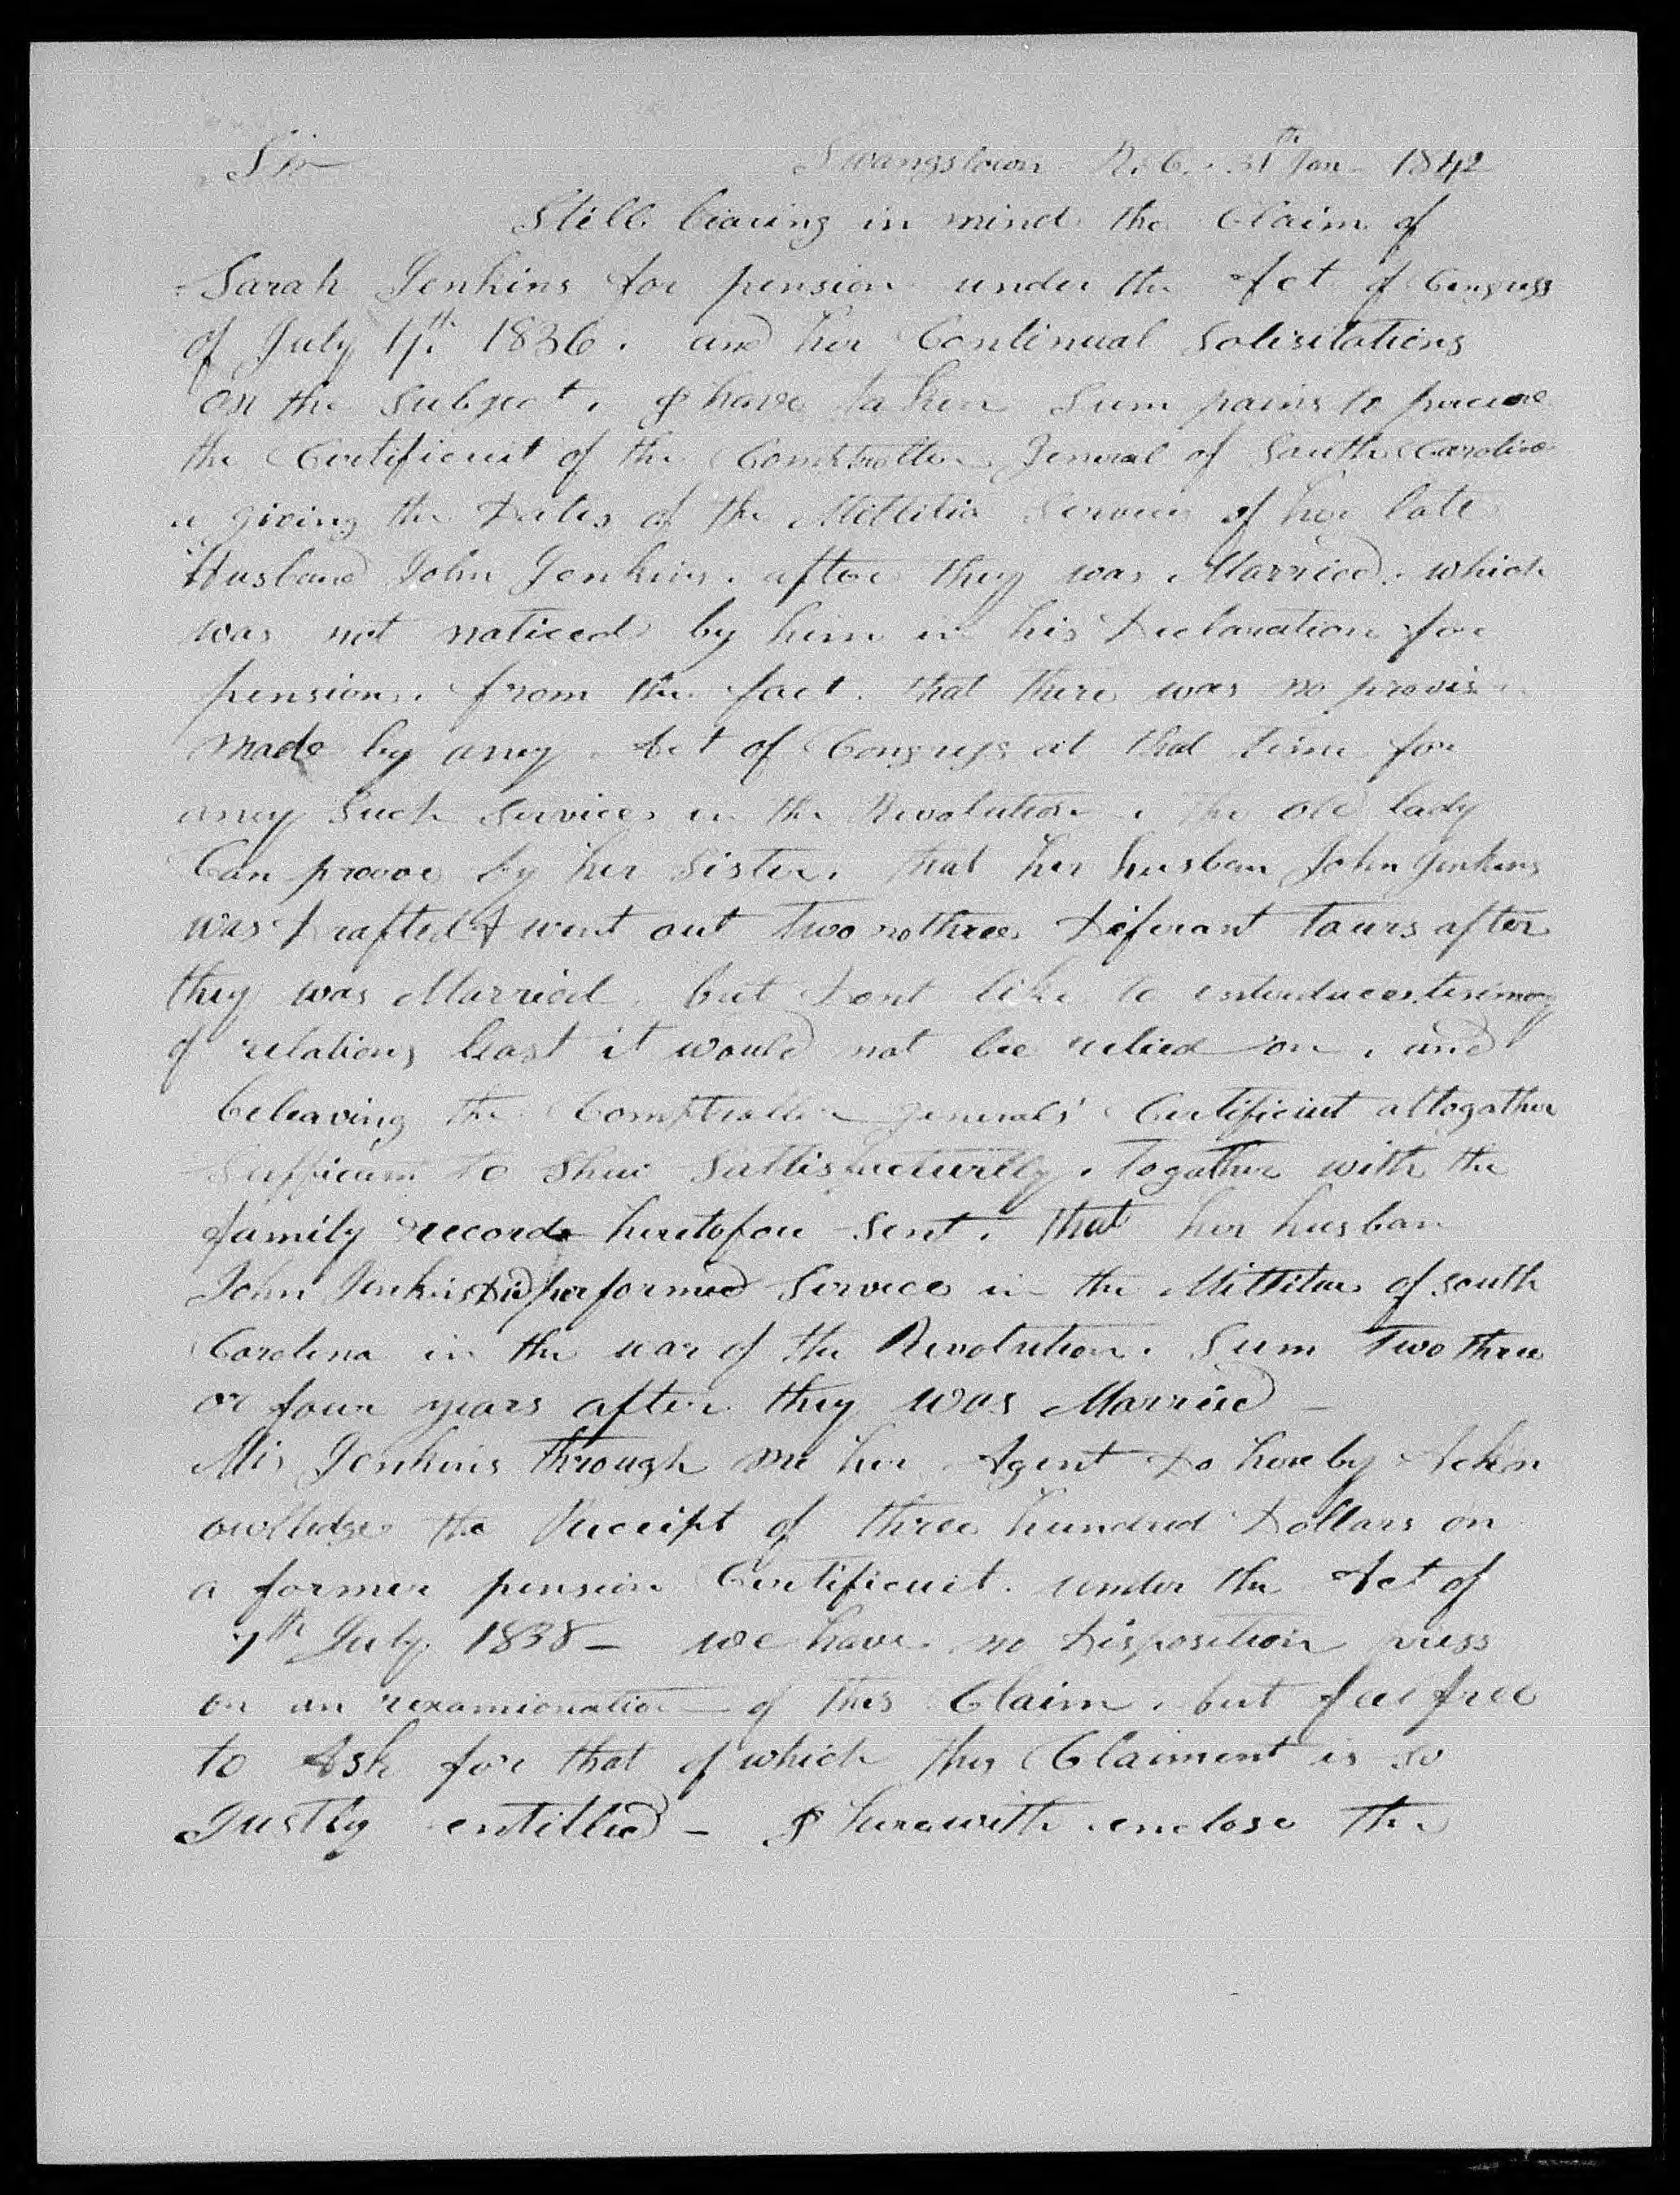 Letter from James Roberts to James L. Edwards, 31 January 1842, page 1